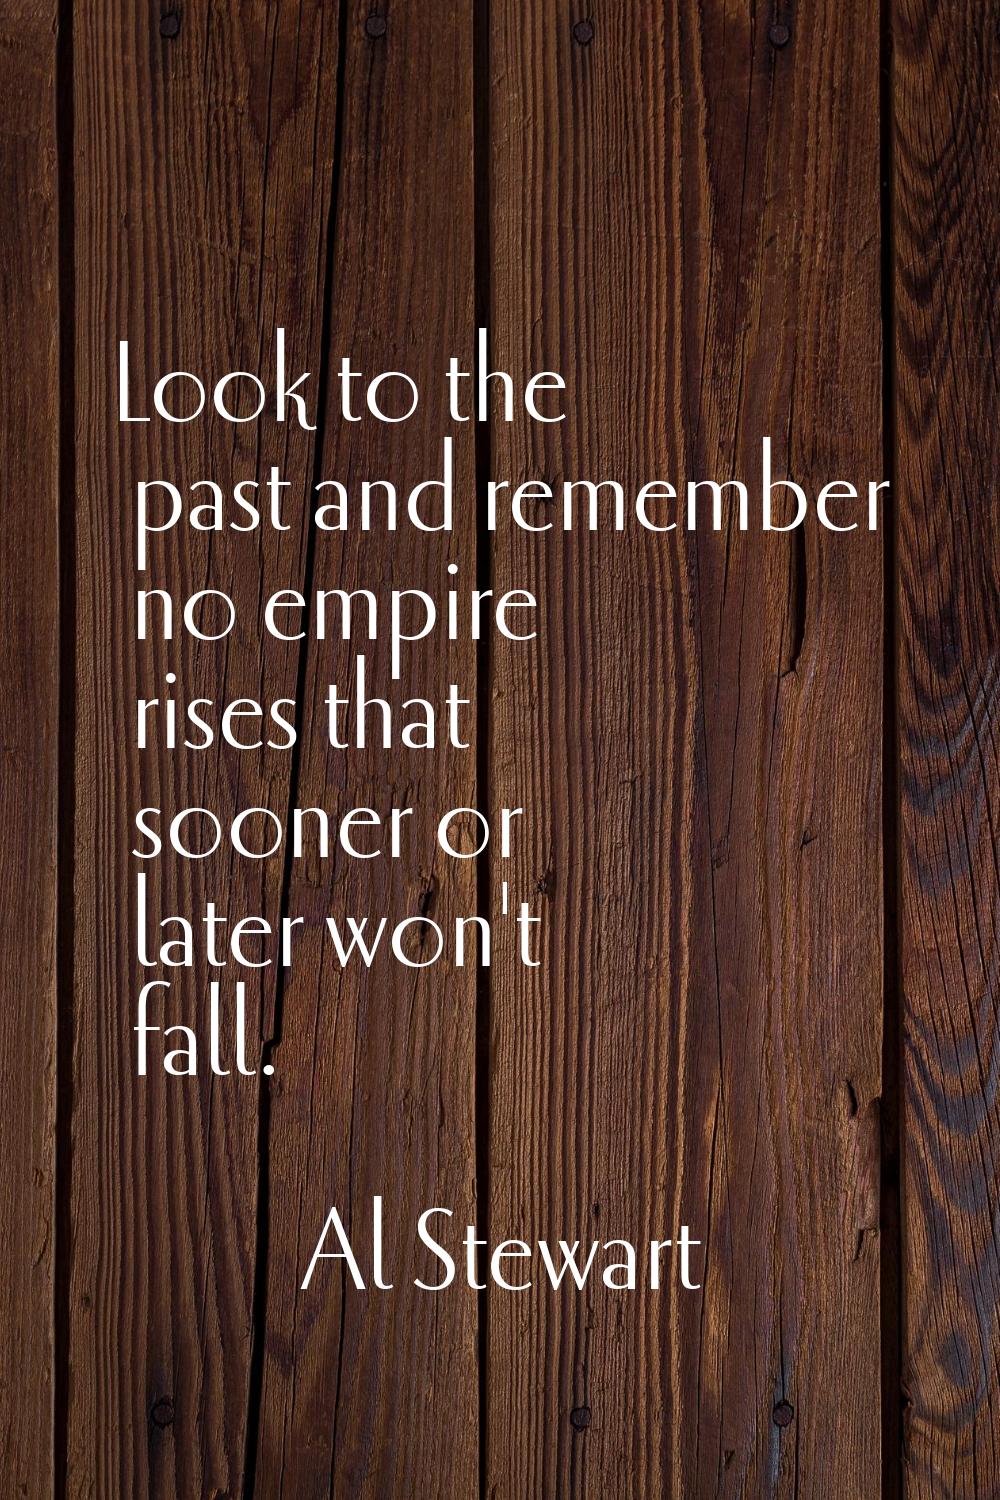 Look to the past and remember no empire rises that sooner or later won't fall.